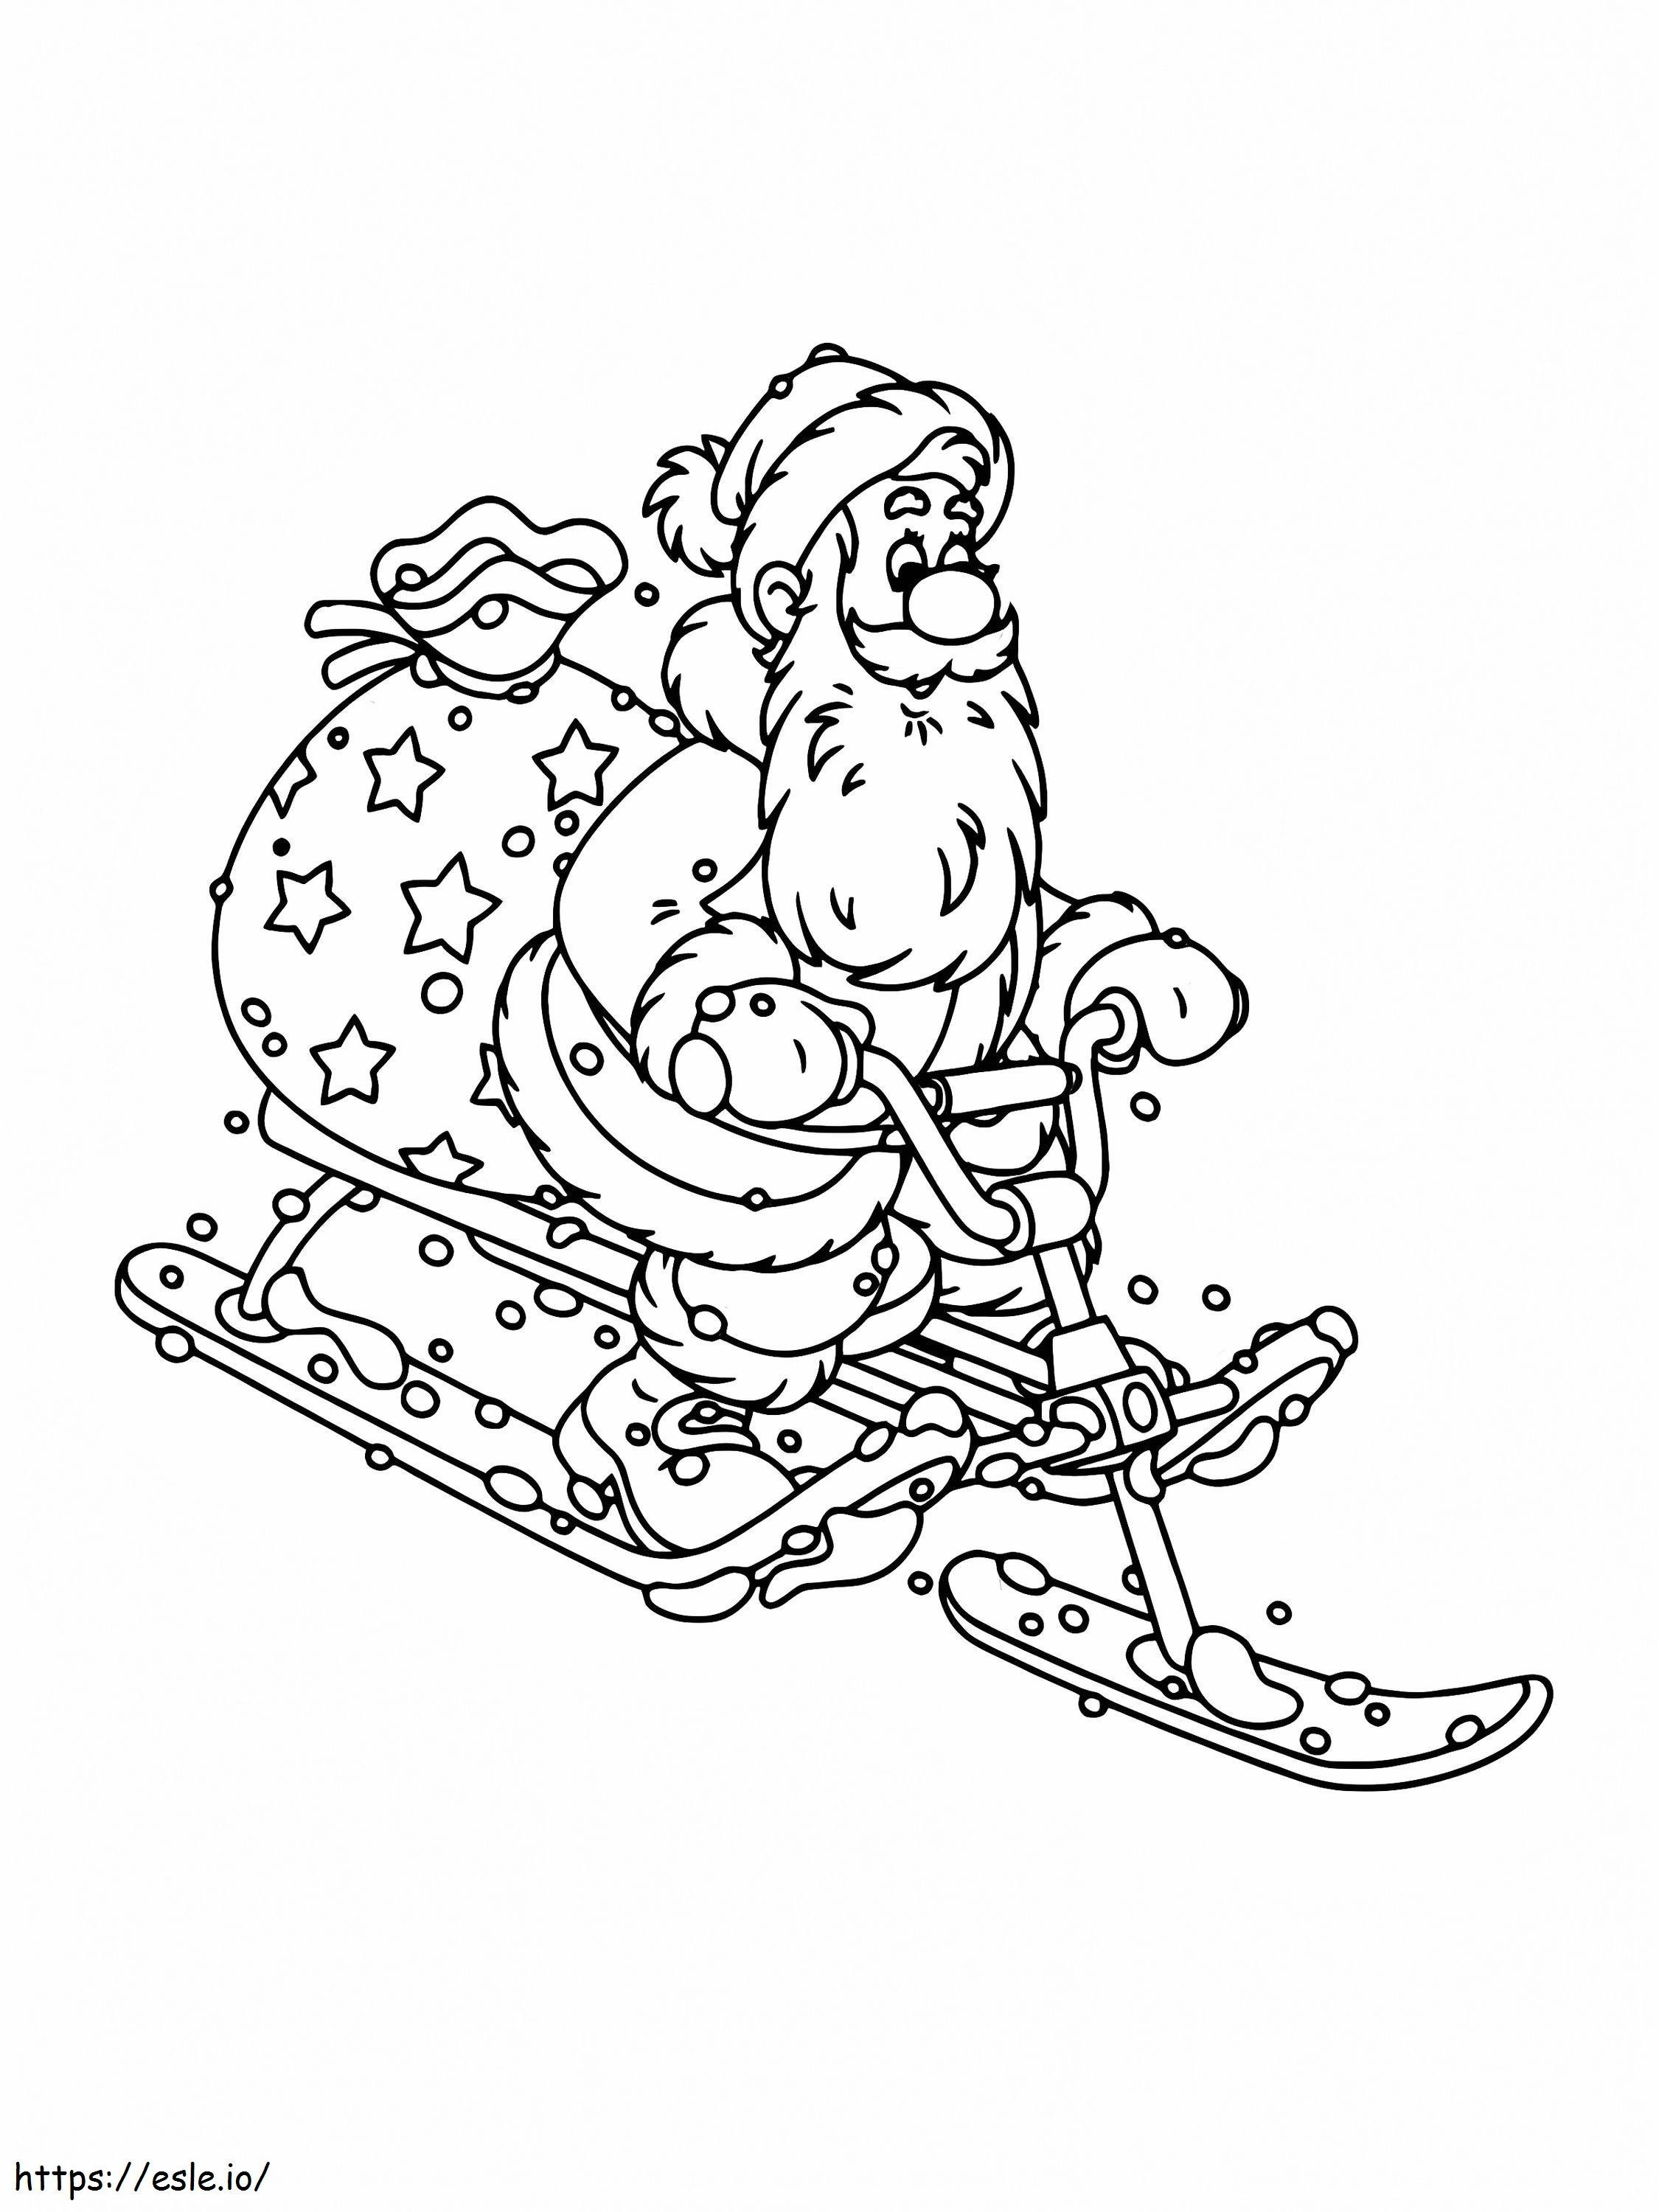 Santa Claus Skiing With Gifts coloring page